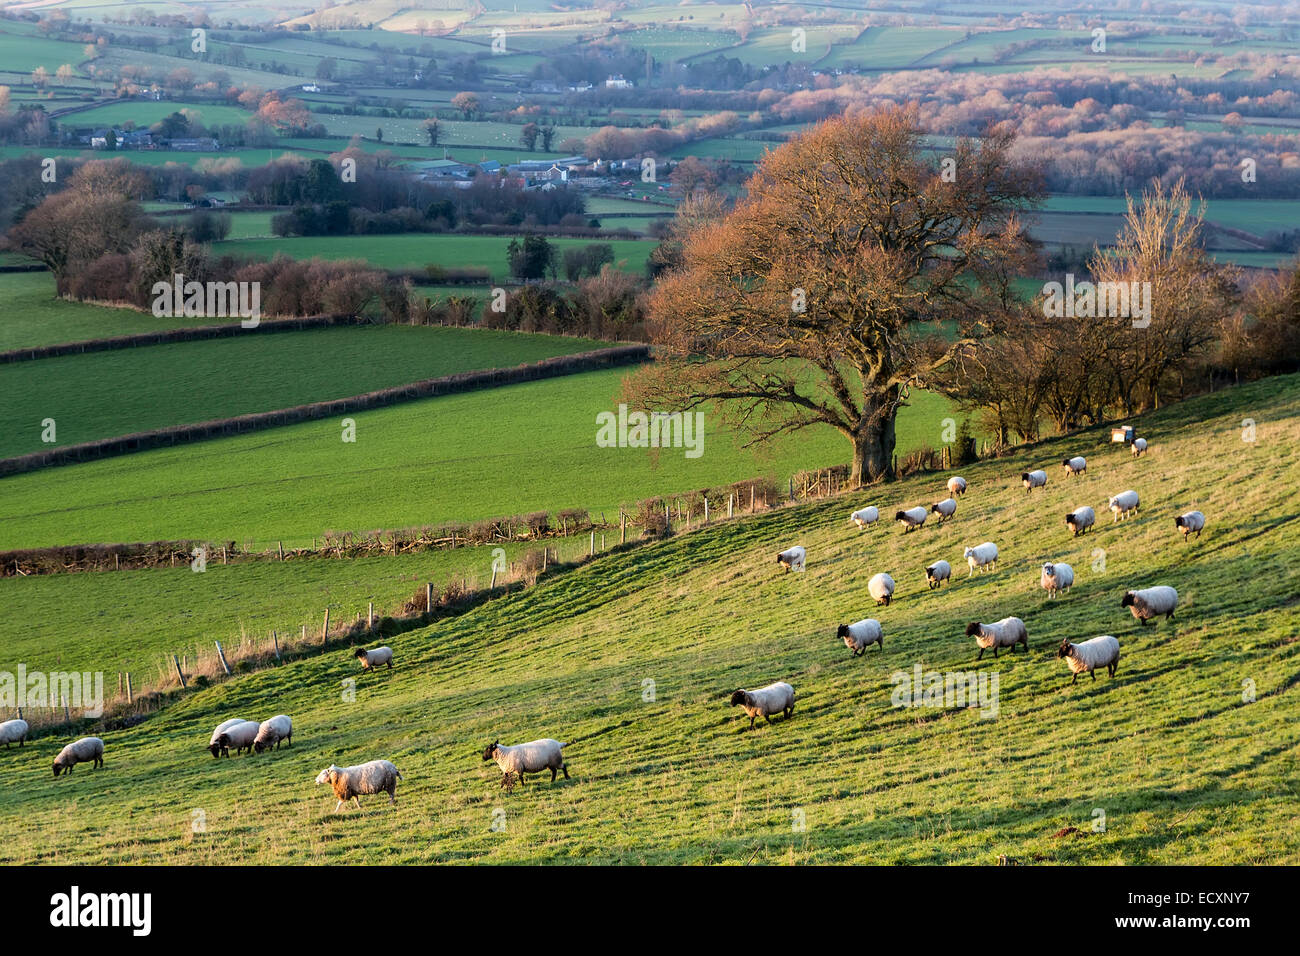 Sheep crossing field, Alt yr Esgair with view into the Usk valley, Wales, UK Stock Photo